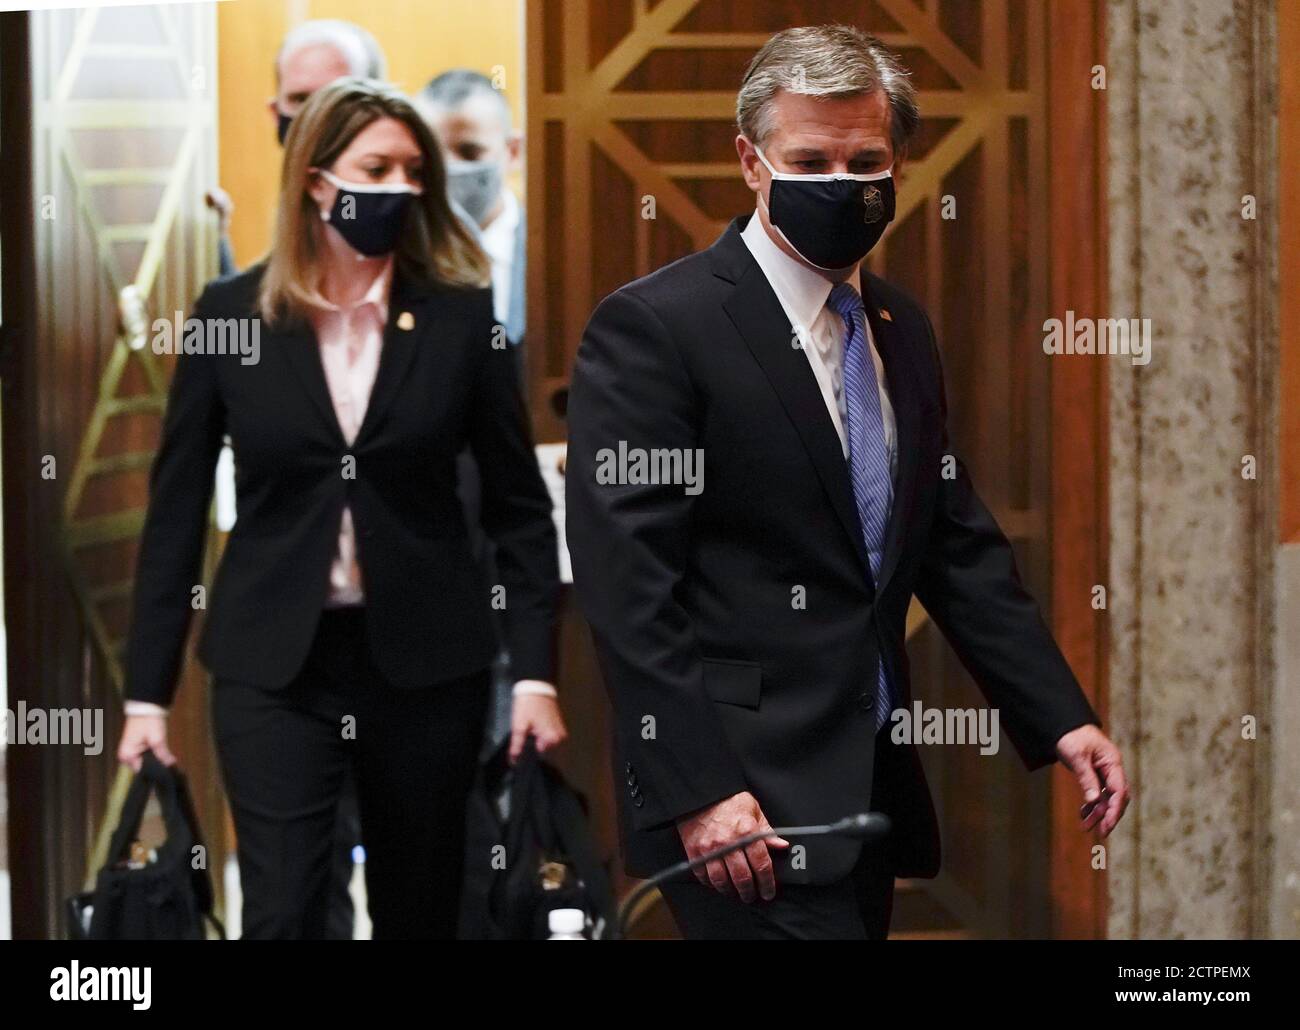 Washington, United States. 24th Sep, 2020. FBI Director Christopher Wray arrives to testify before a Senate Homeland Security and Governmental Affairs Committee hearing on 'Threats to the Homeland' on Capitol Hill in Washington, DC on Thursday, September 24, 2020. Pool photo by Joshua Roberts/UPI Credit: UPI/Alamy Live News Stock Photo